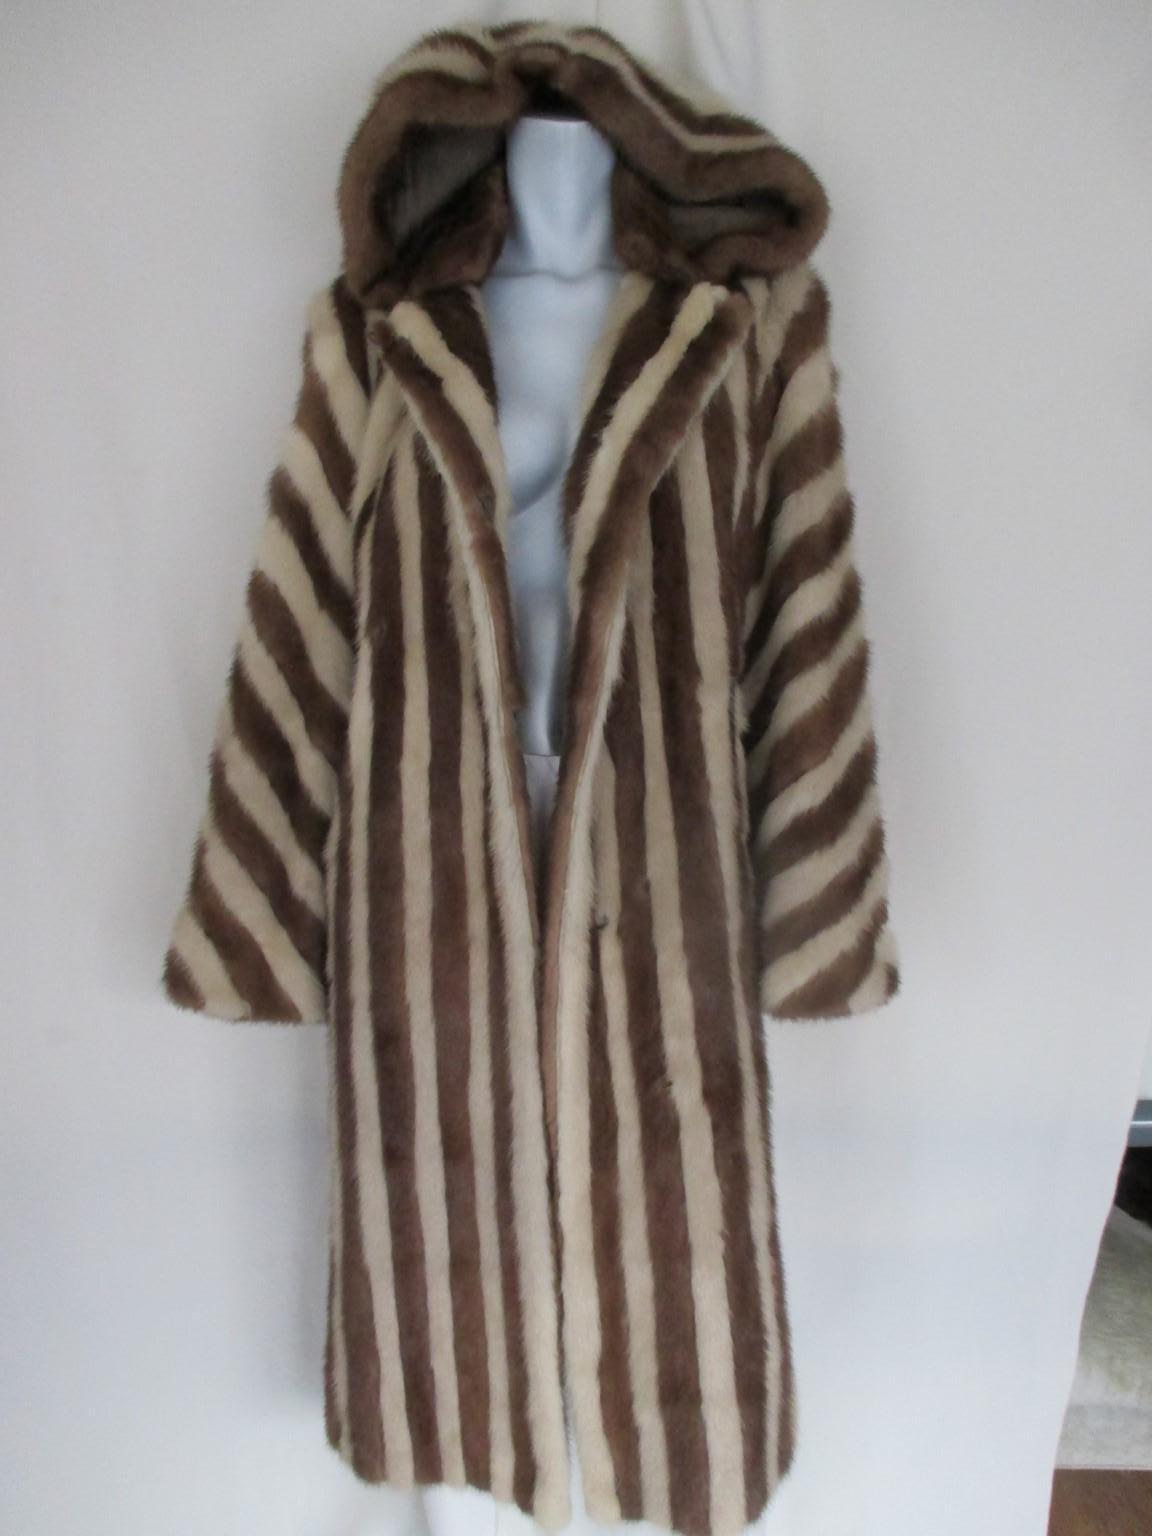 This brown/creme mink coat with a large hood , has side splits, 1 hook at the collar, 3 closing hooks and 2 pockets.
The end of the sleeves can be fold from the total lenght 62 cm to 57 cm
It's in good vintage condition with some minimal wear of